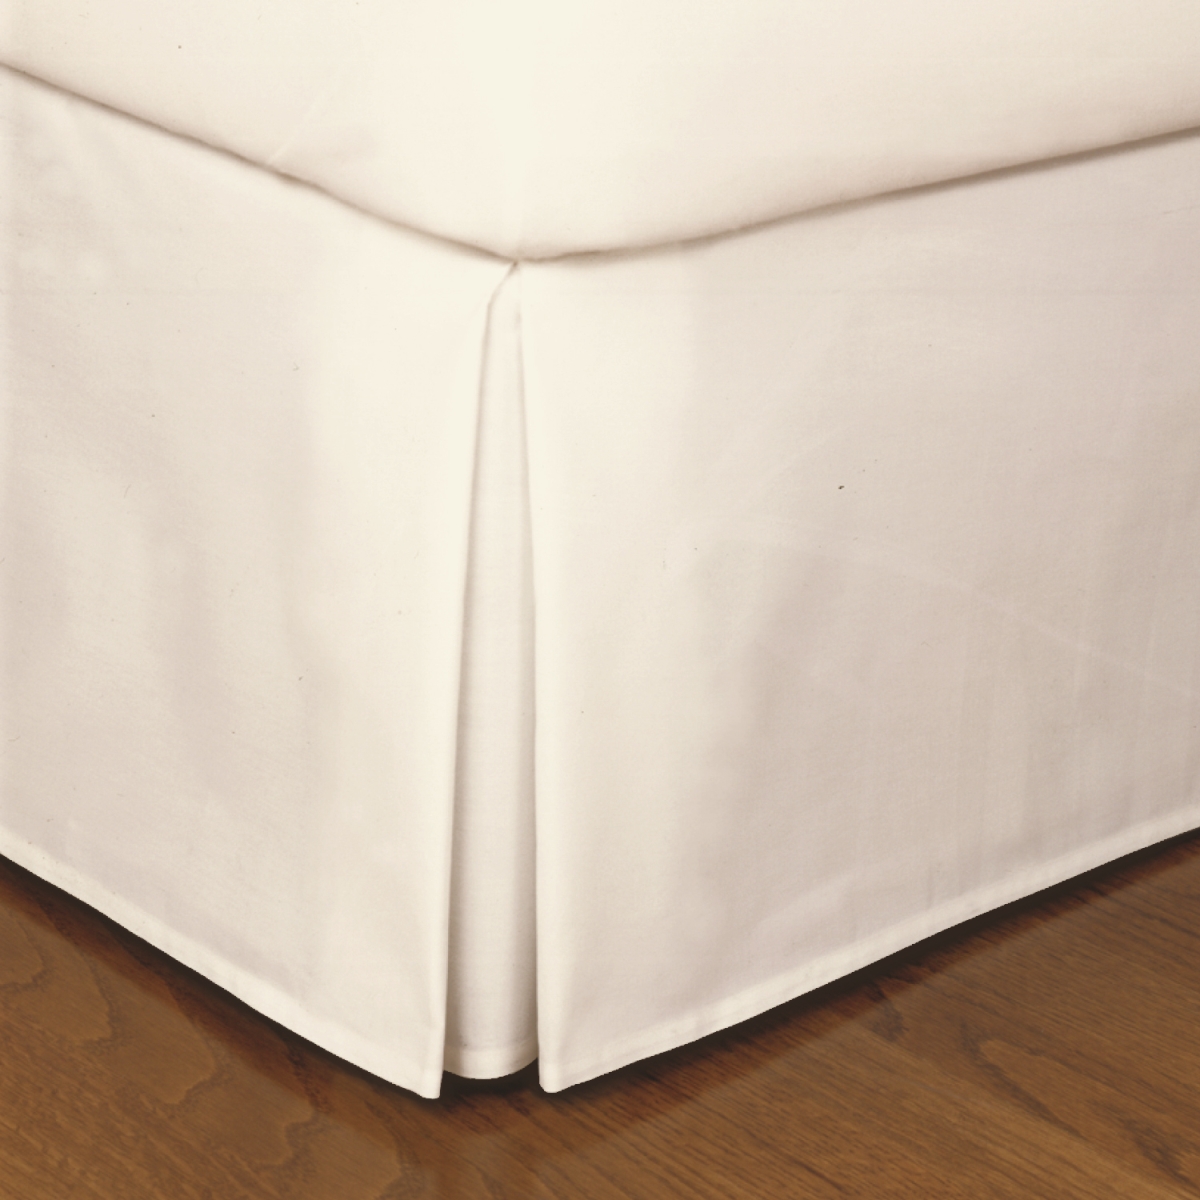 Fre23614ivor03 14 In. Microfiber Bed Skirts Ivory - Queen